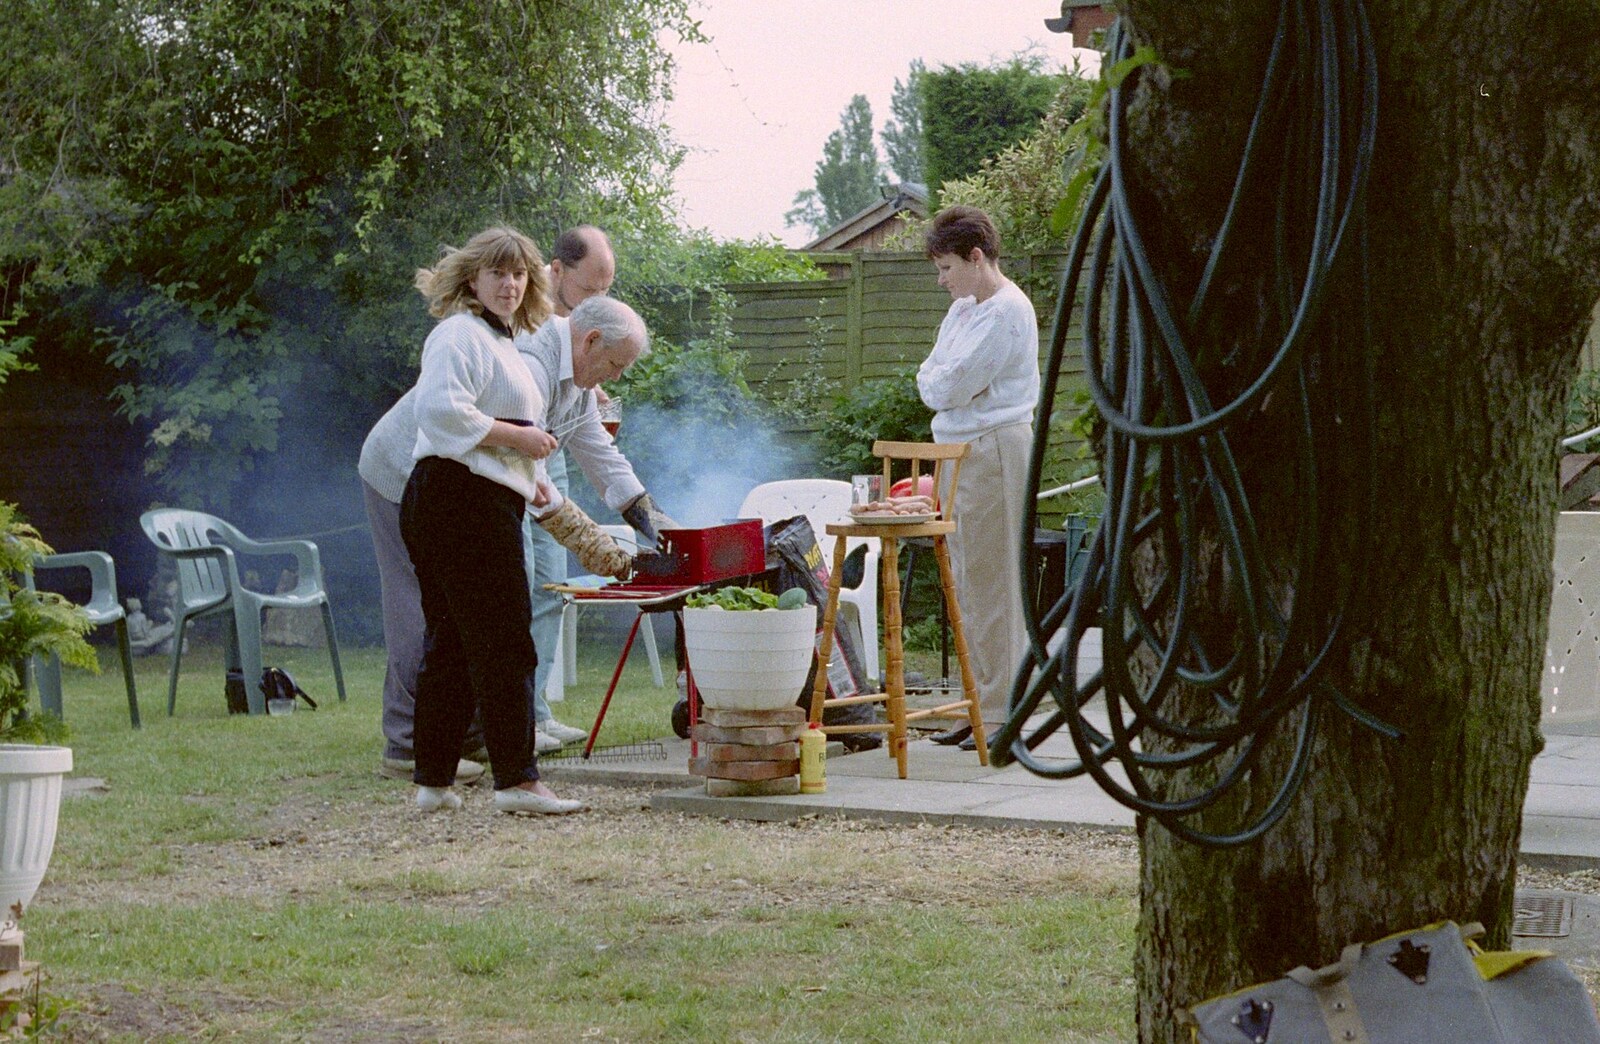 Sarah looks over as Kenny's barbeque smokes from Sarah's Birthday Barbeque, Burston, Norfolk - 7th June 1994